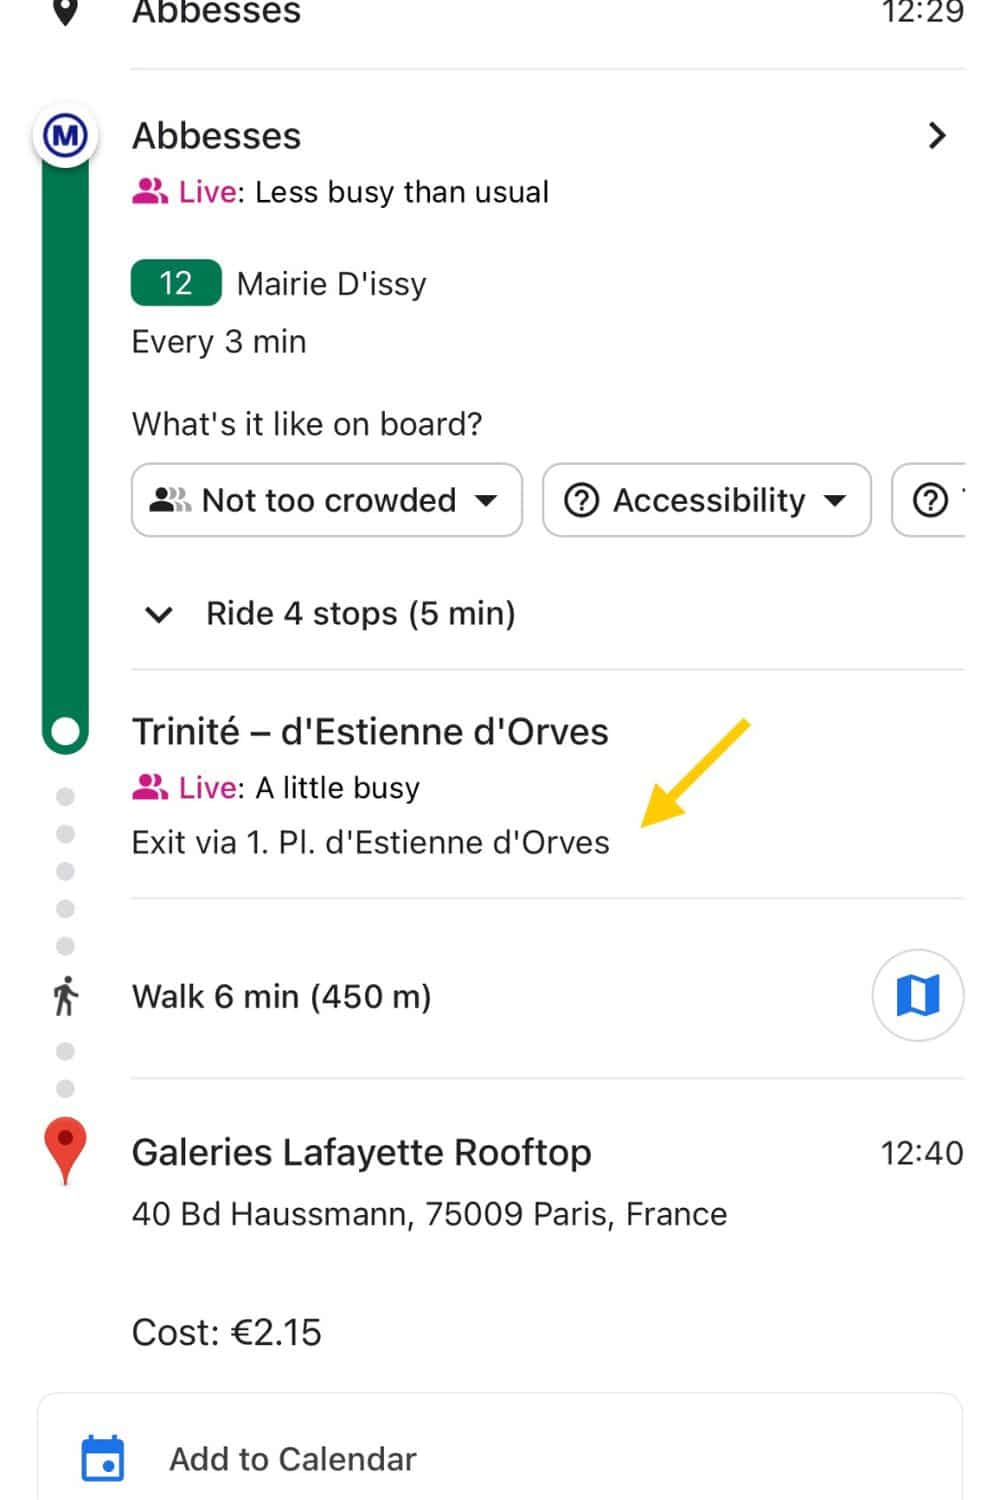 smartphone displaying a navigation app with route details for travel in Paris. It indicates the journey from Abbesses to the Galeries Lafayette Rooftop via the Mairie D'issy metro line 12, including live updates on crowd levels and accessibility.